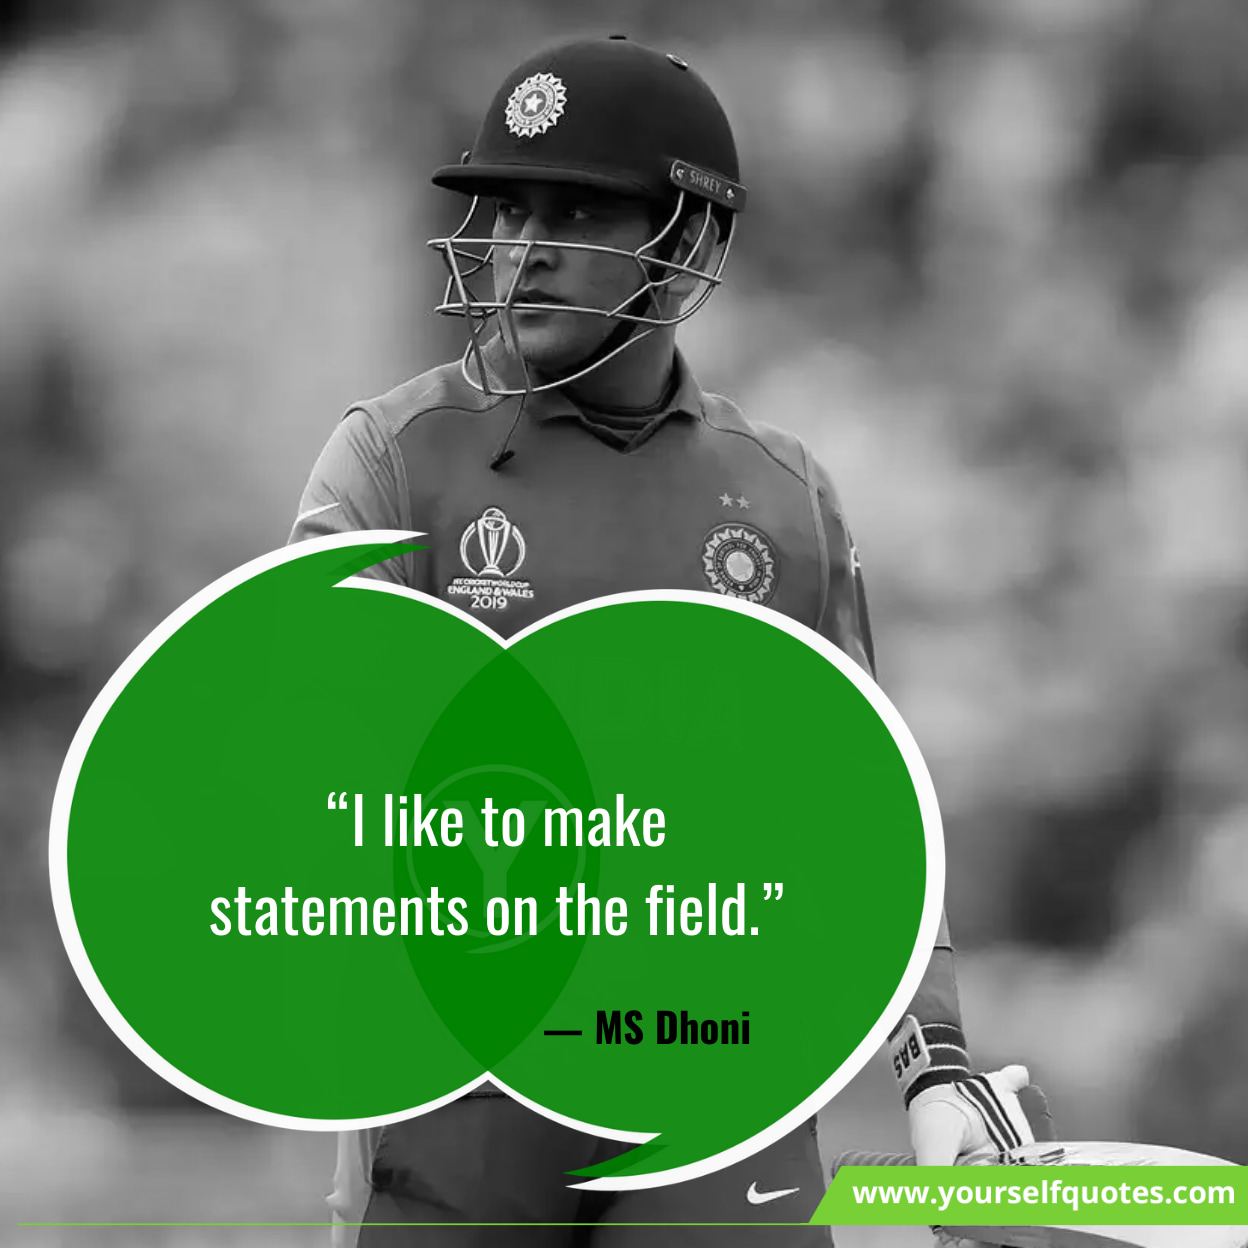 MS Dhoni Cricket Quotes